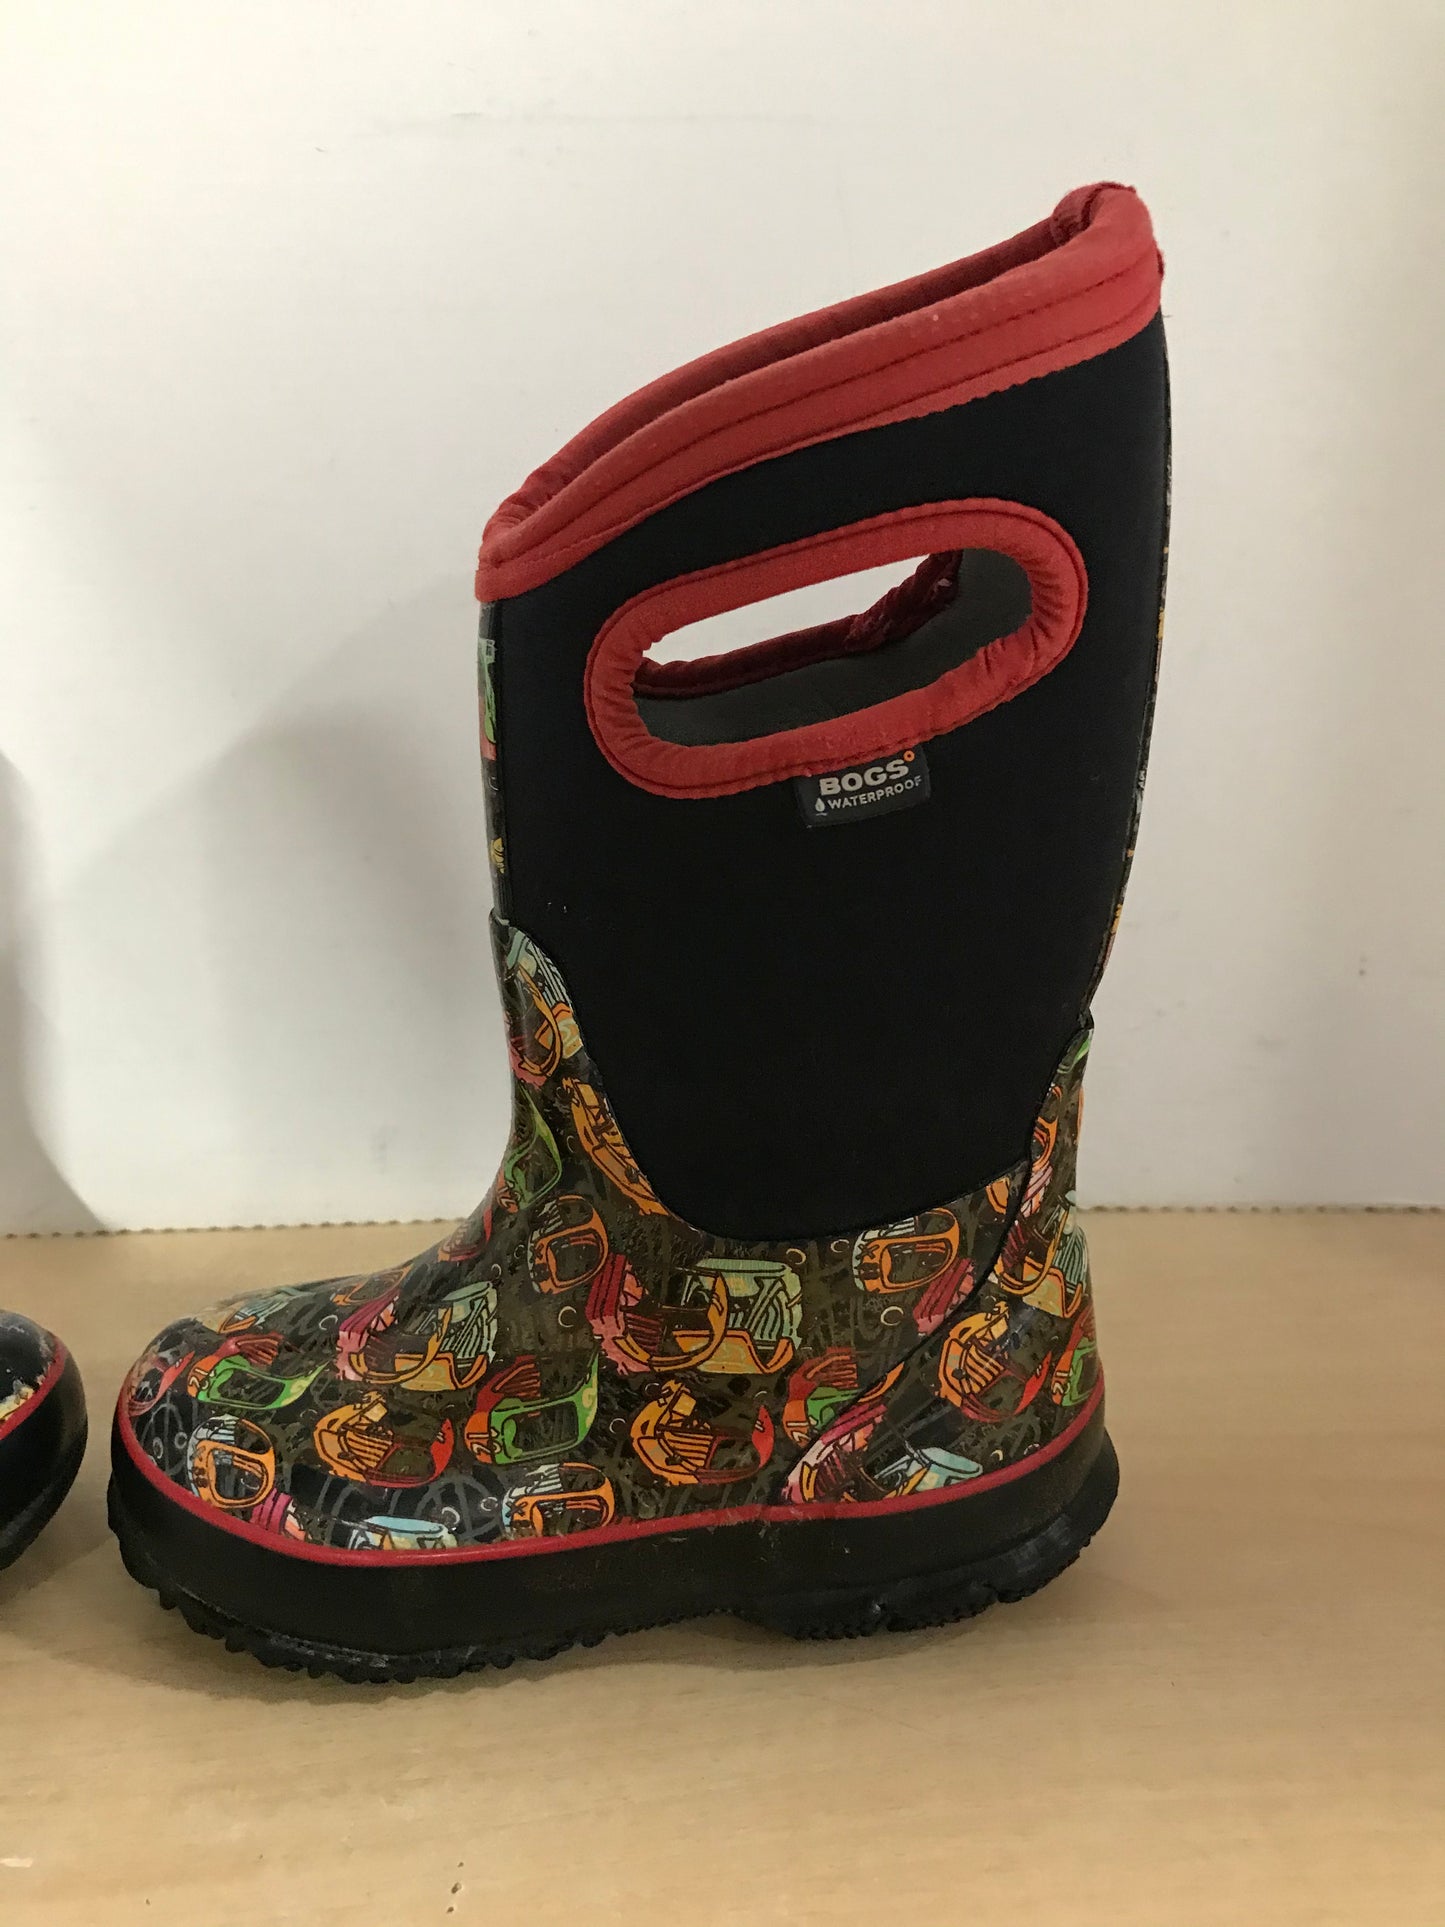 Bogs Brand Child Size 10 Black Multi With Cozy Coupe Cars Neoprene Rubber Rain Winter Snow Waterproof Boots